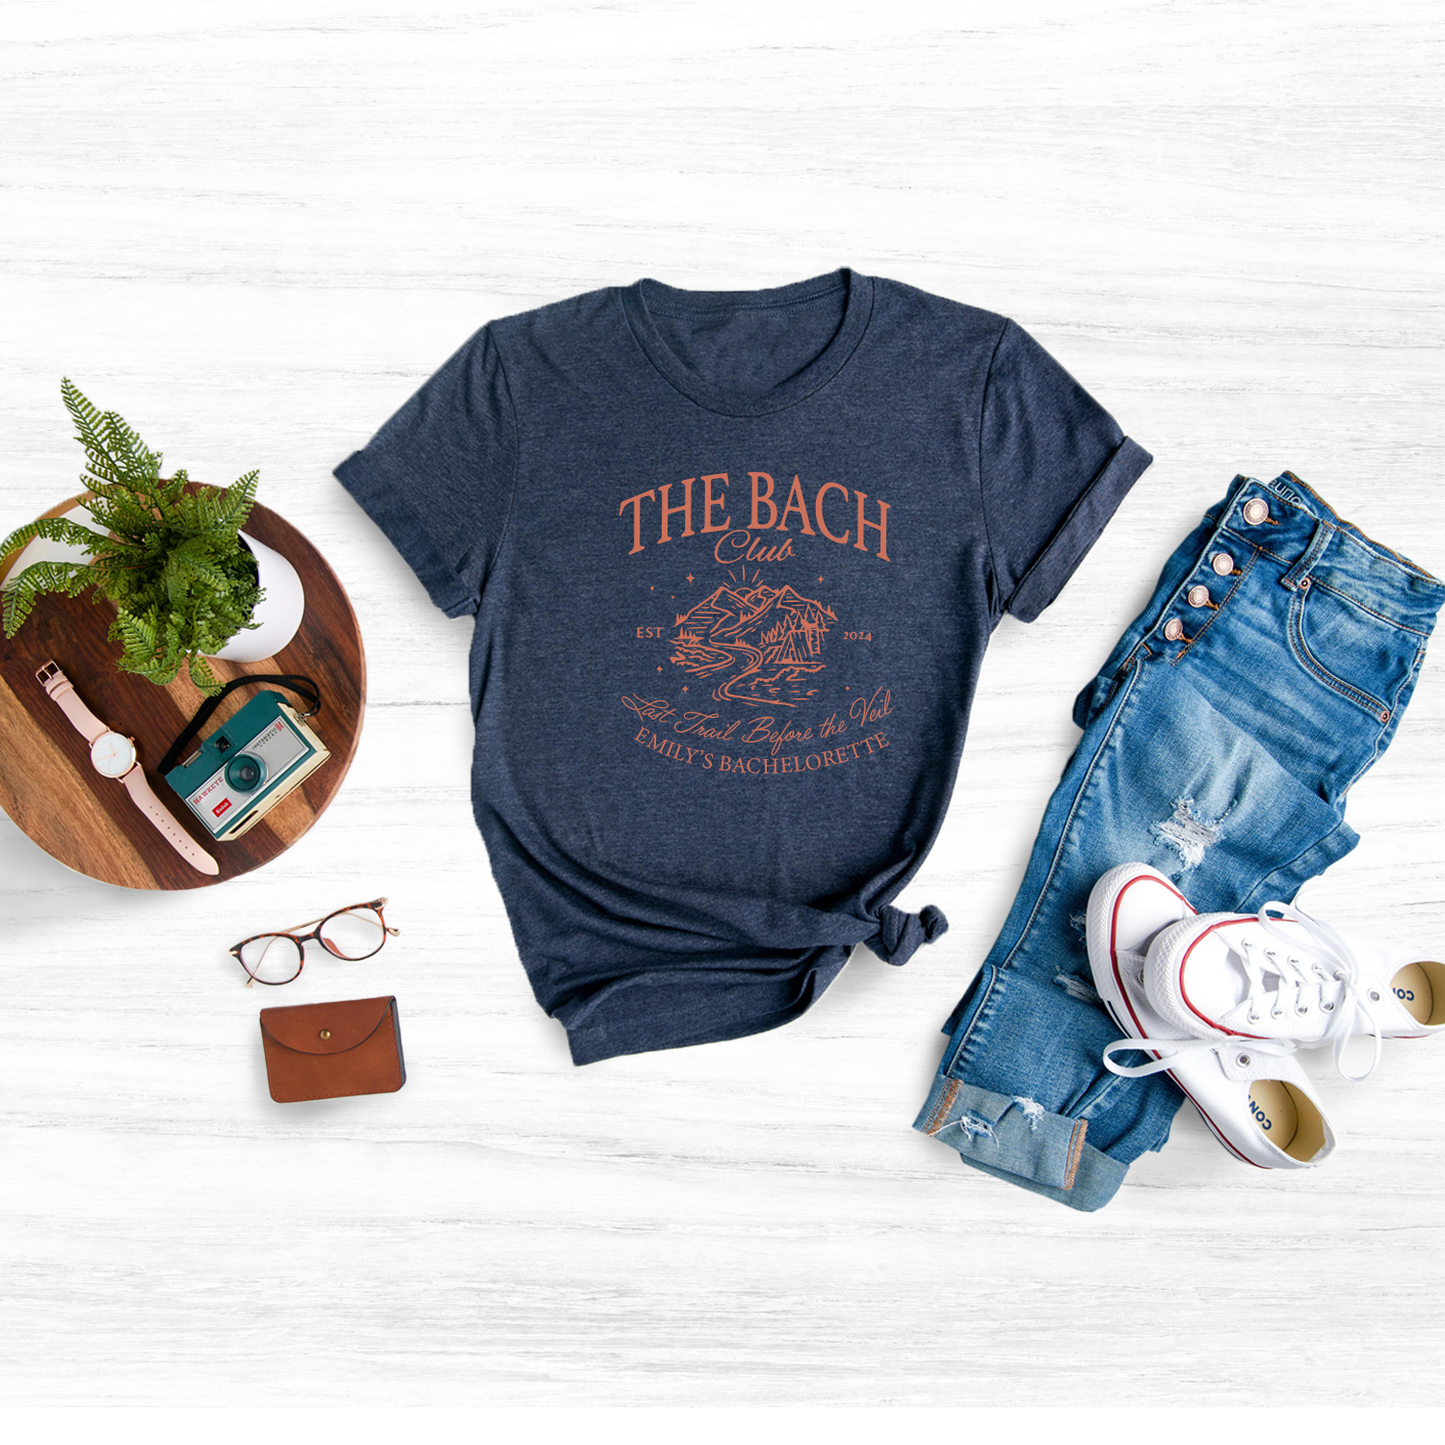 Embrace the laid-back charm of a seaside getaway with our stylish "The Beach Club" Future Bride Shirt